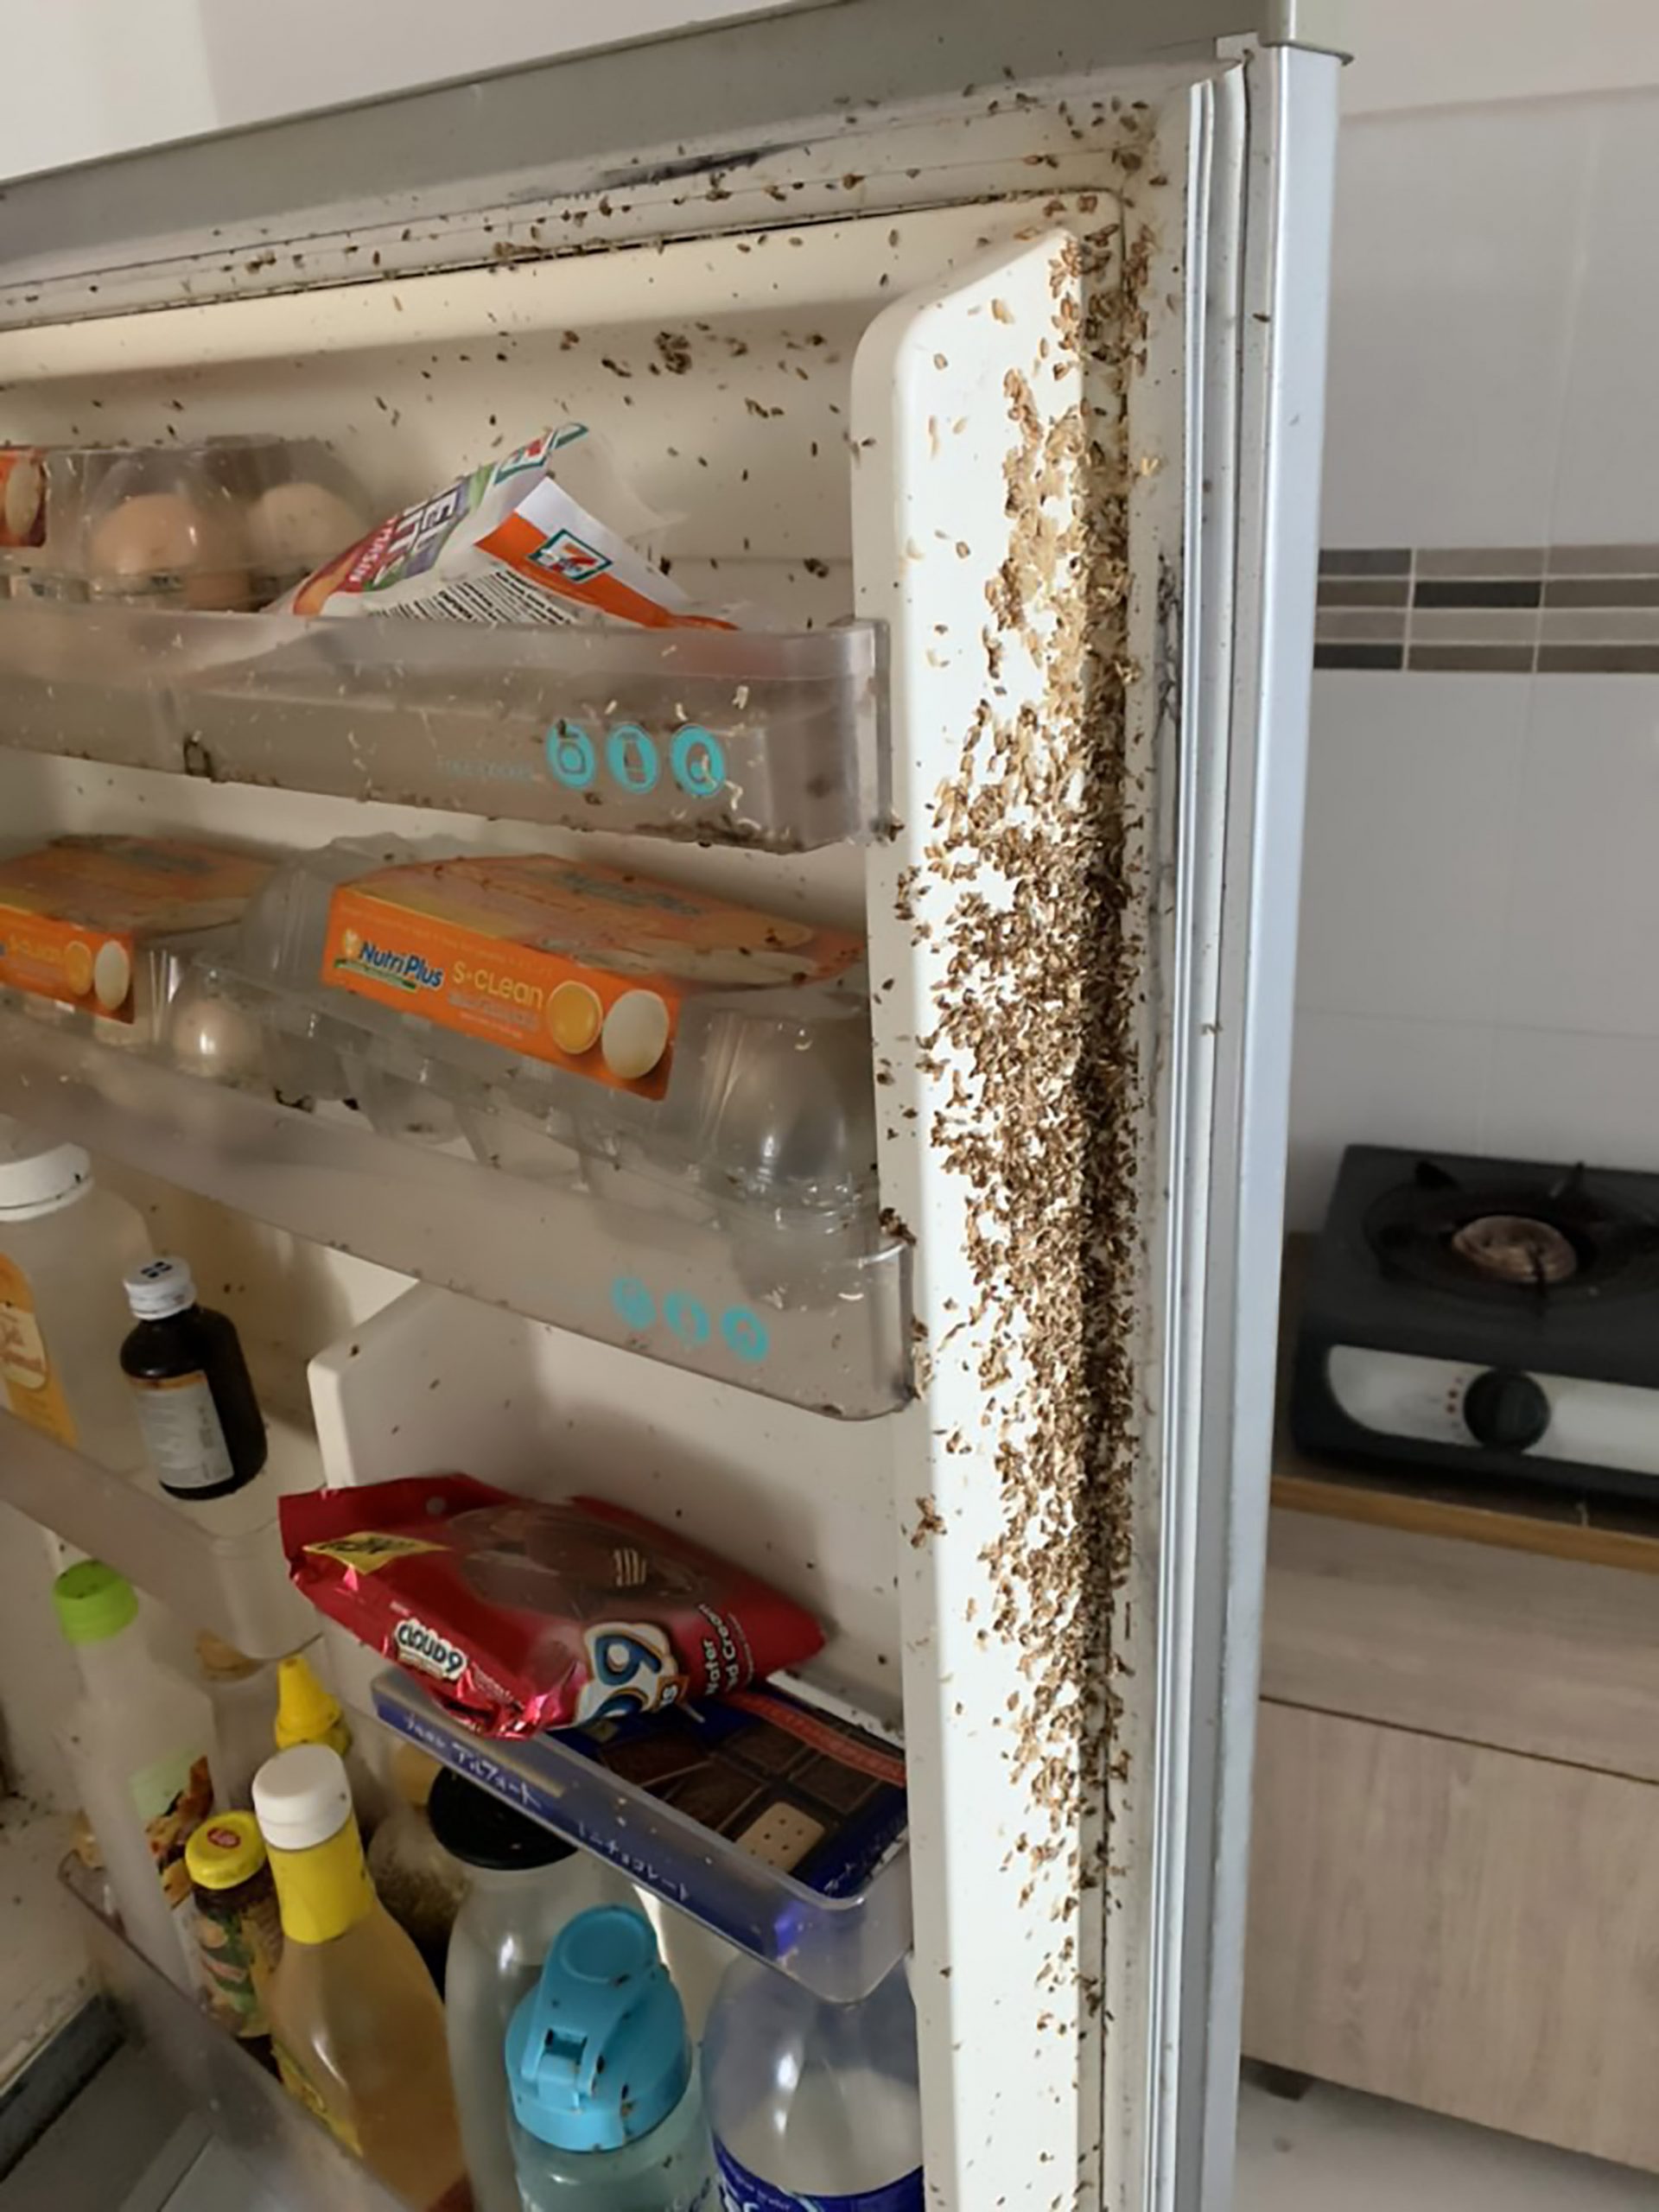 Read more about the article Student Finds Fridge Filled With Maggots After Lockdown